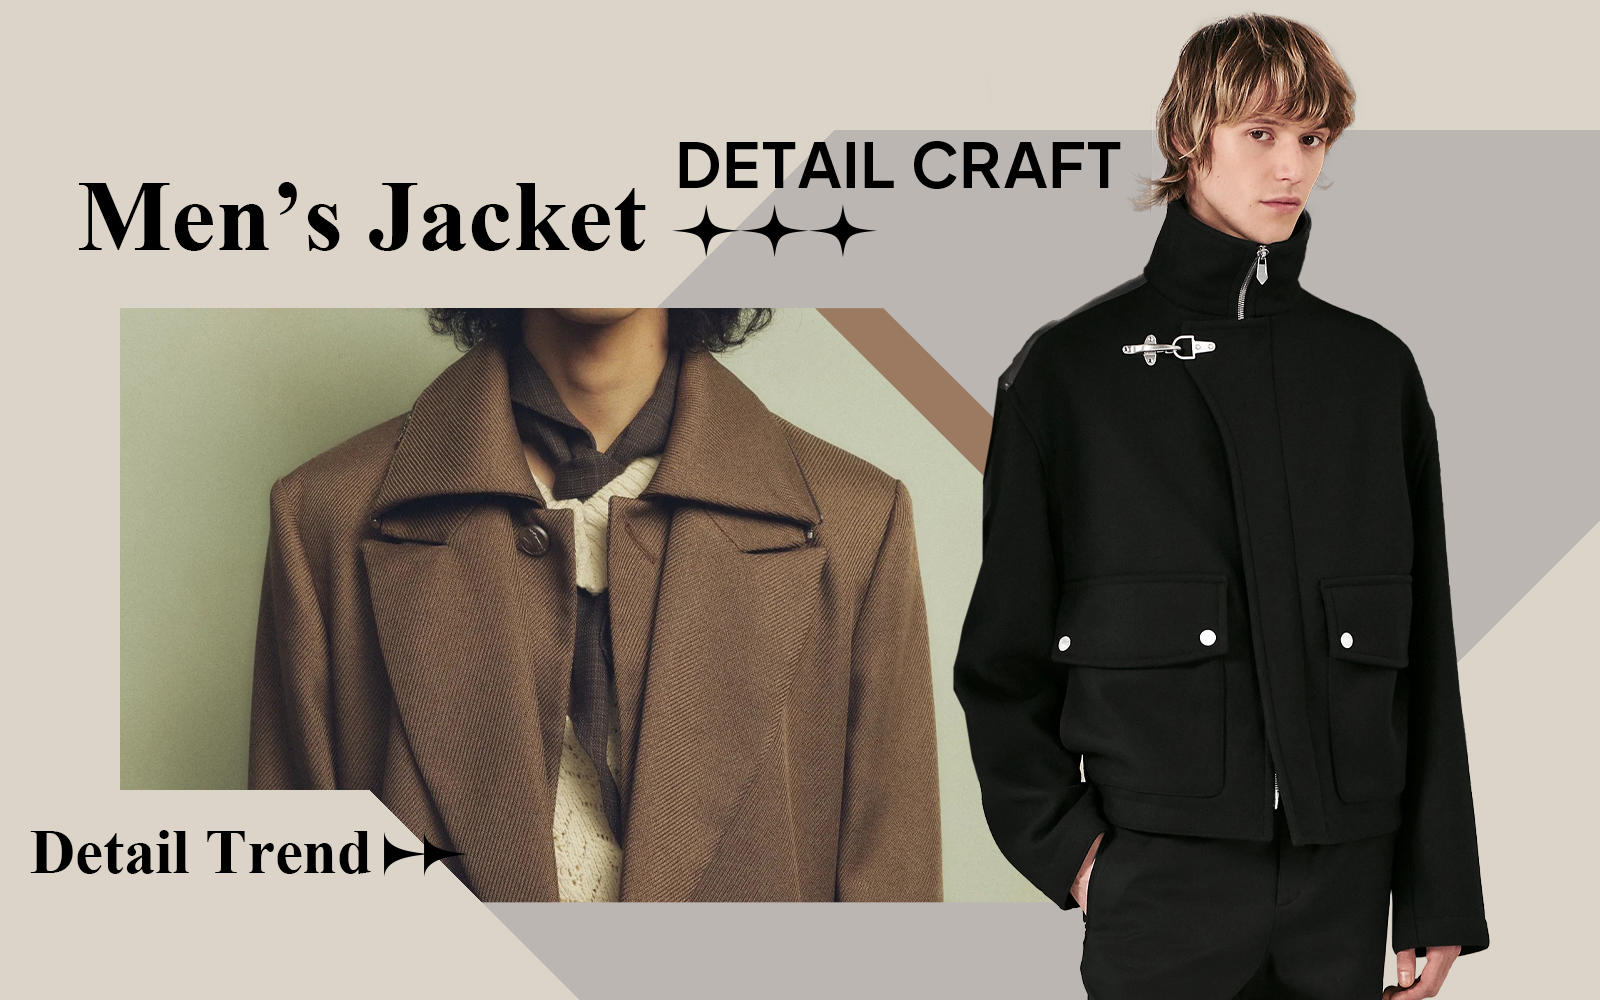 Urban Fashion -- The Detail & Craft Trend for Men's Jacket